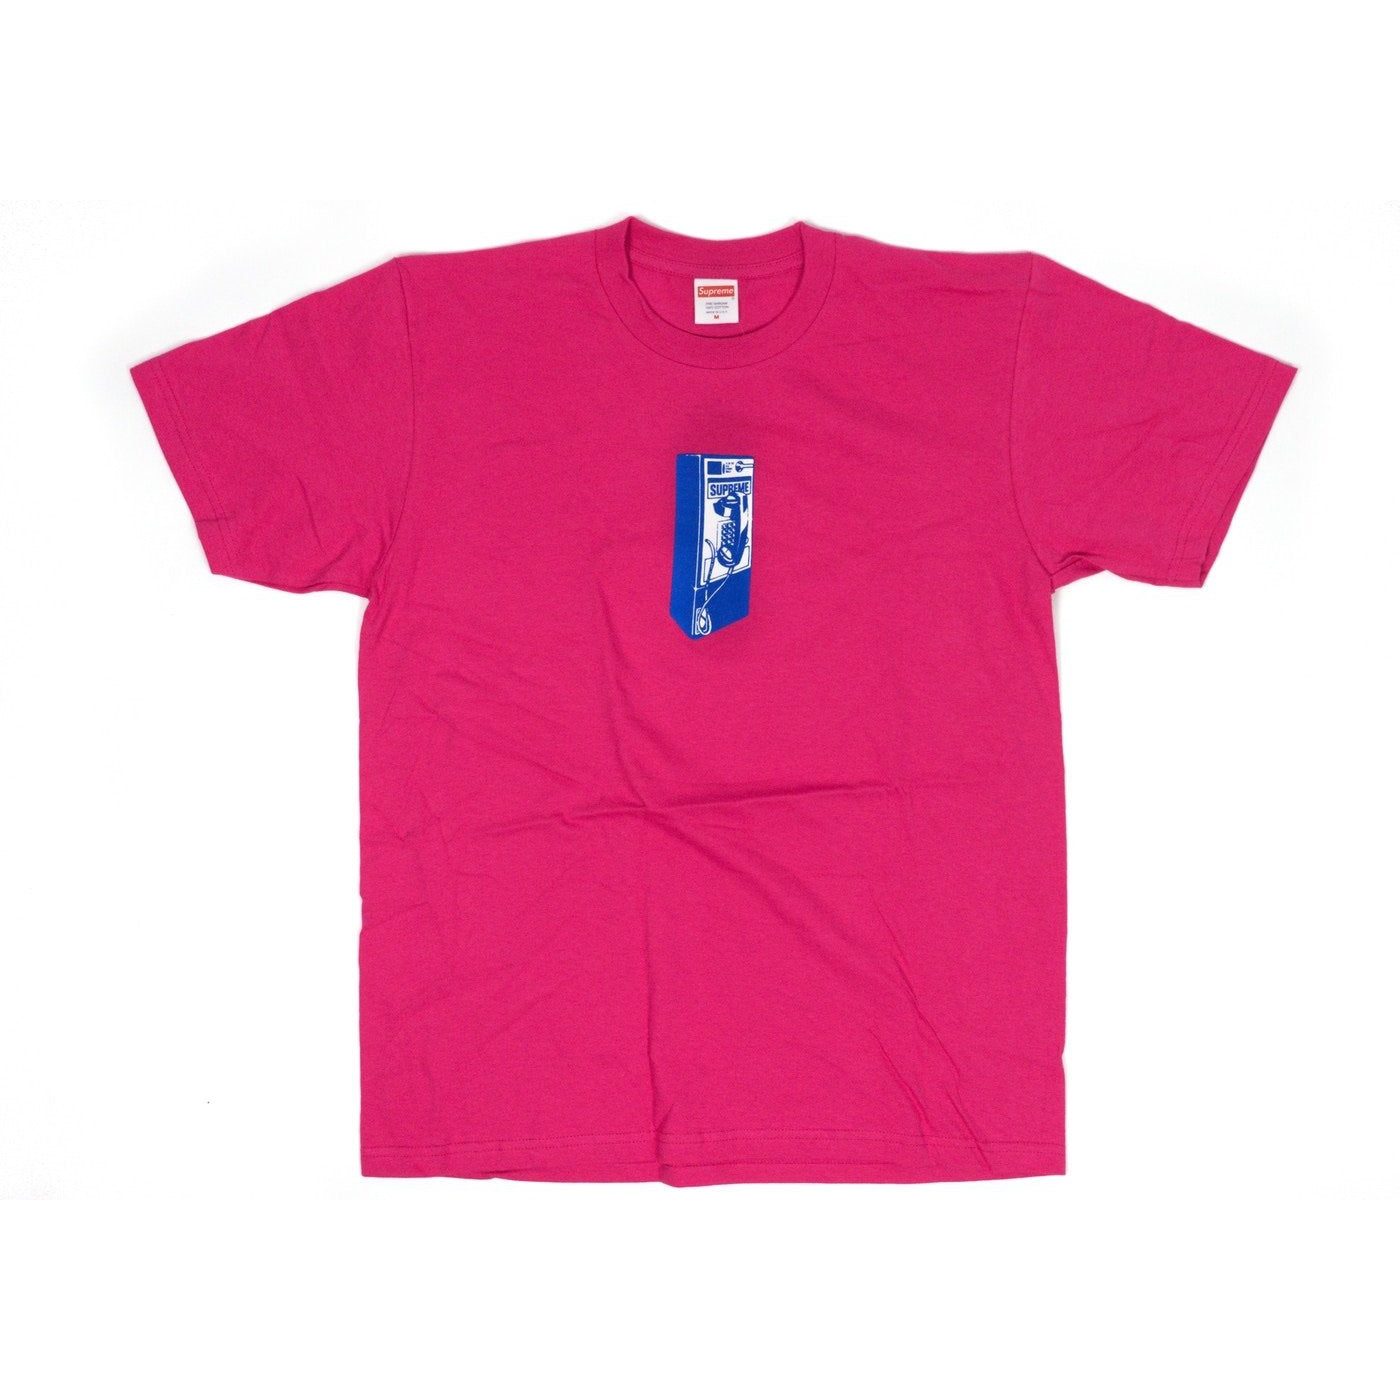 Supreme pay phone tee dark pink - Centrall Online